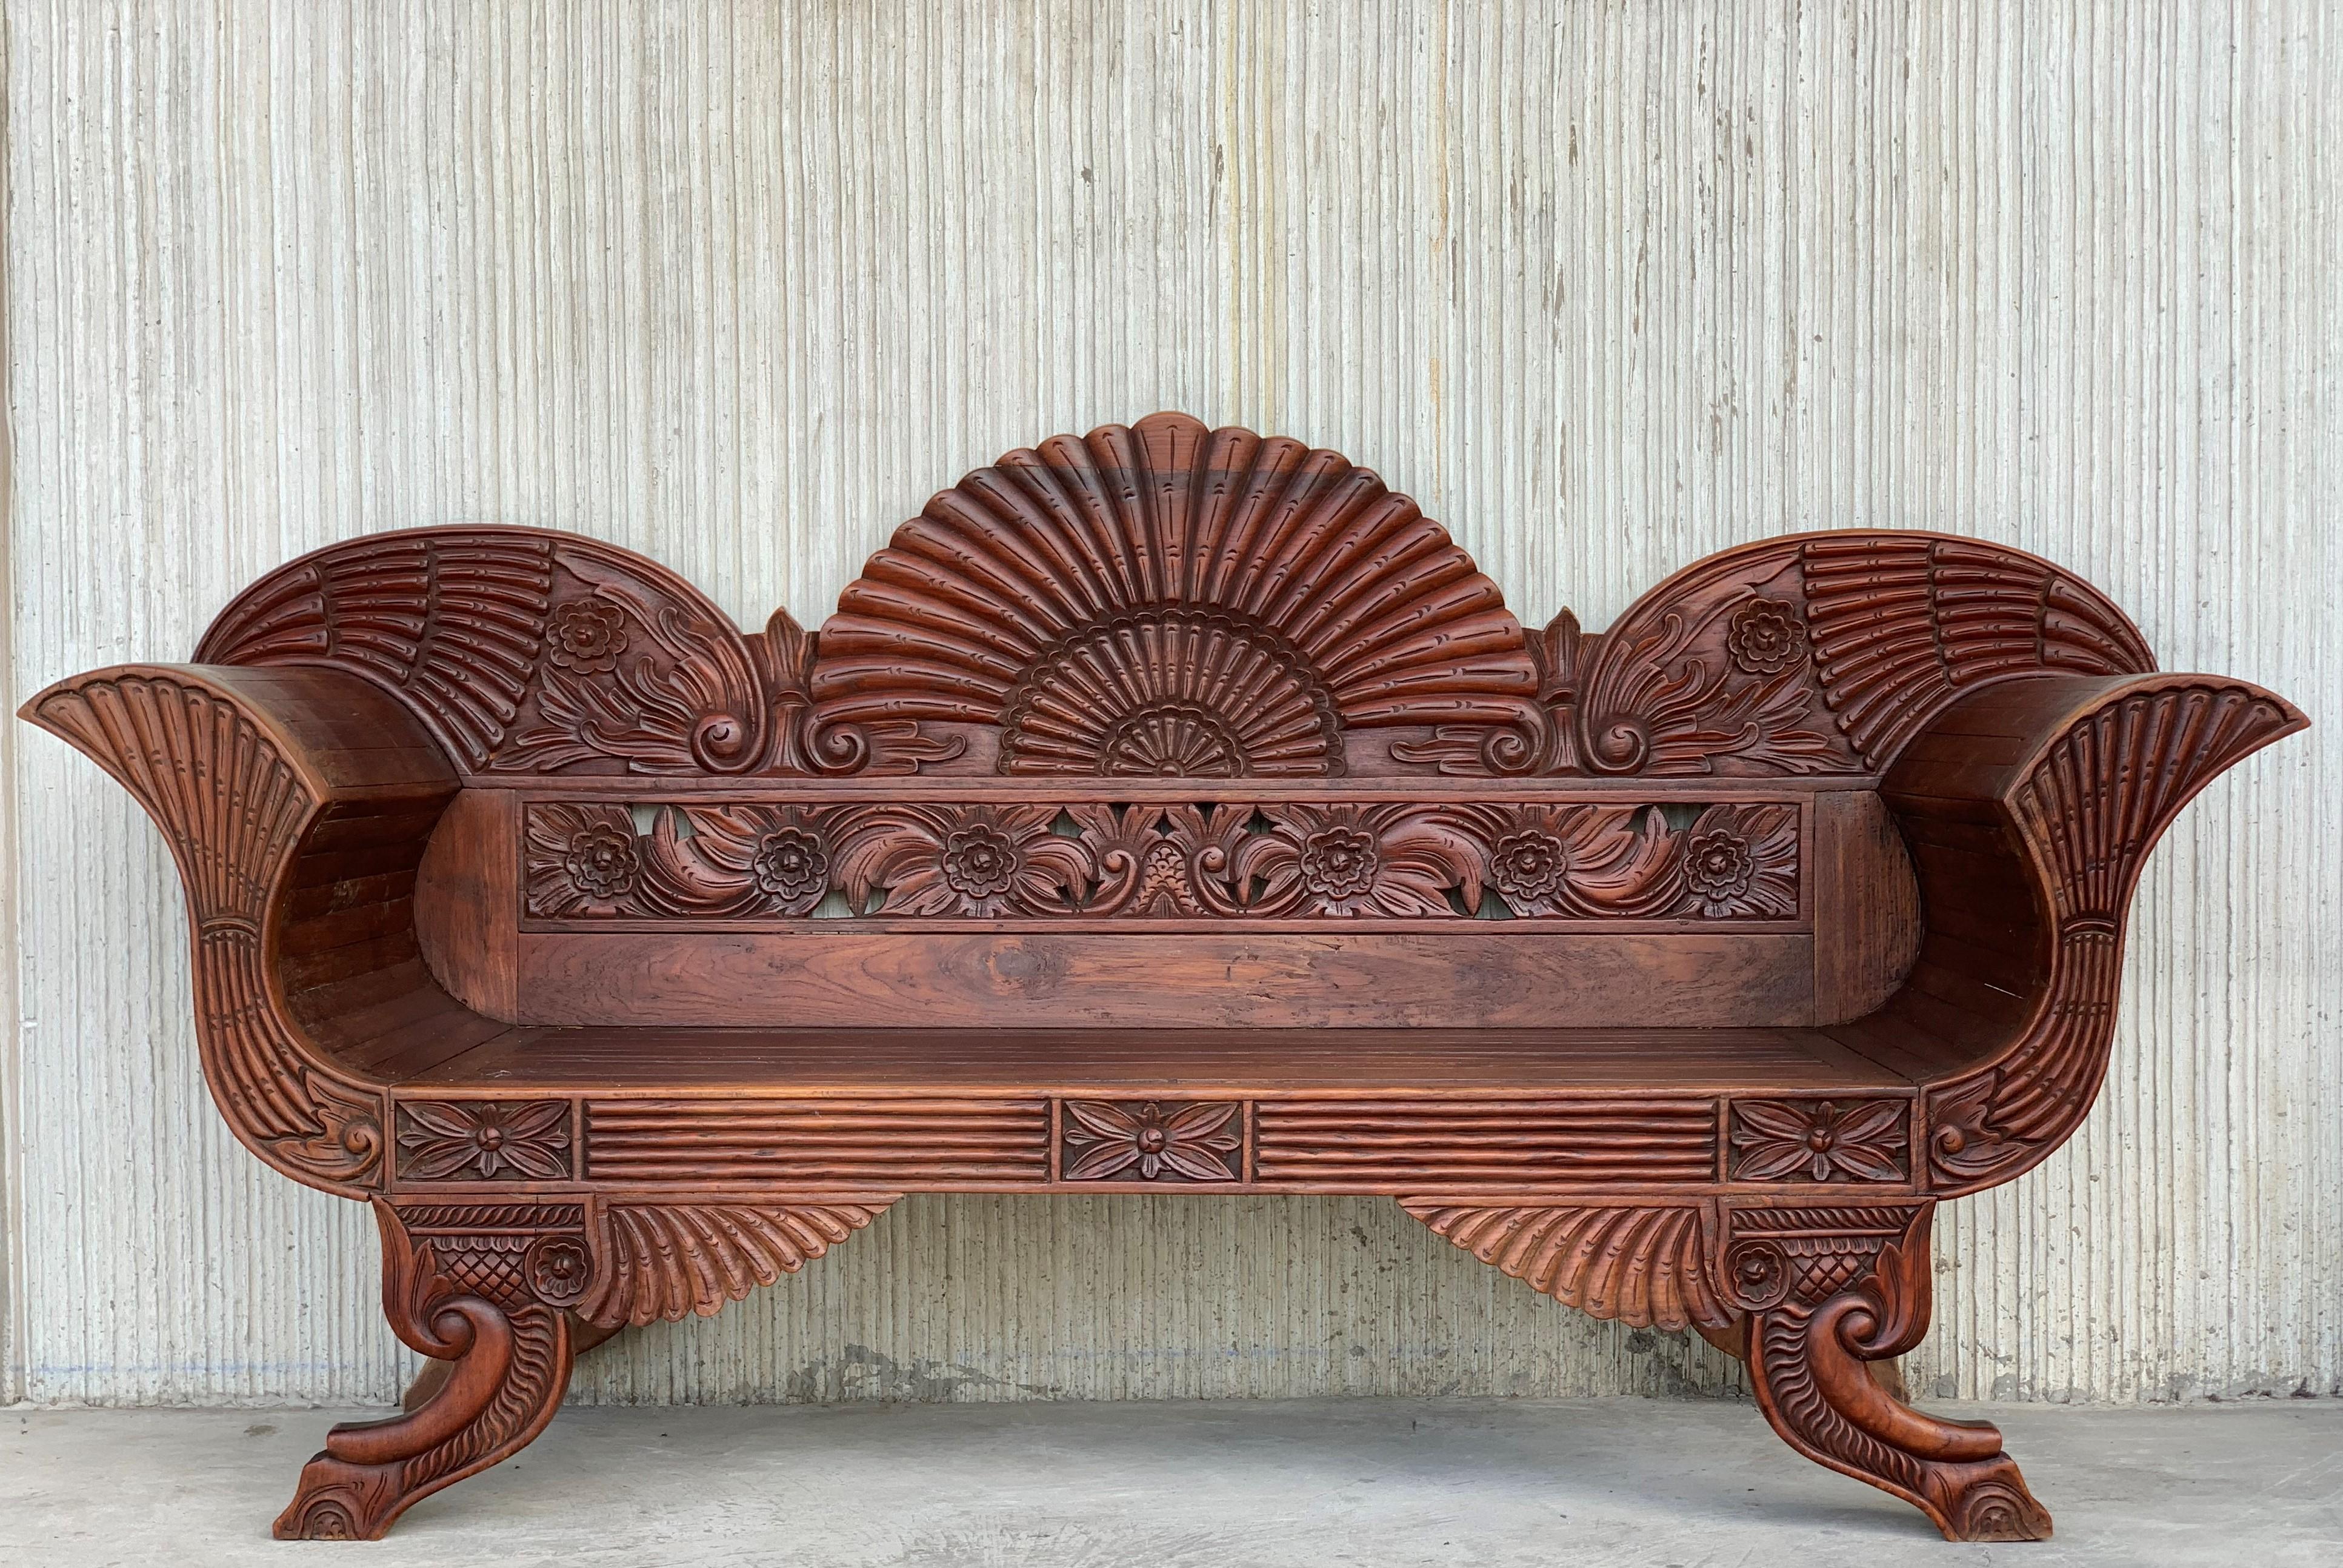 20th century Spanish carved back garden bench or settee with curved arms.
     

  